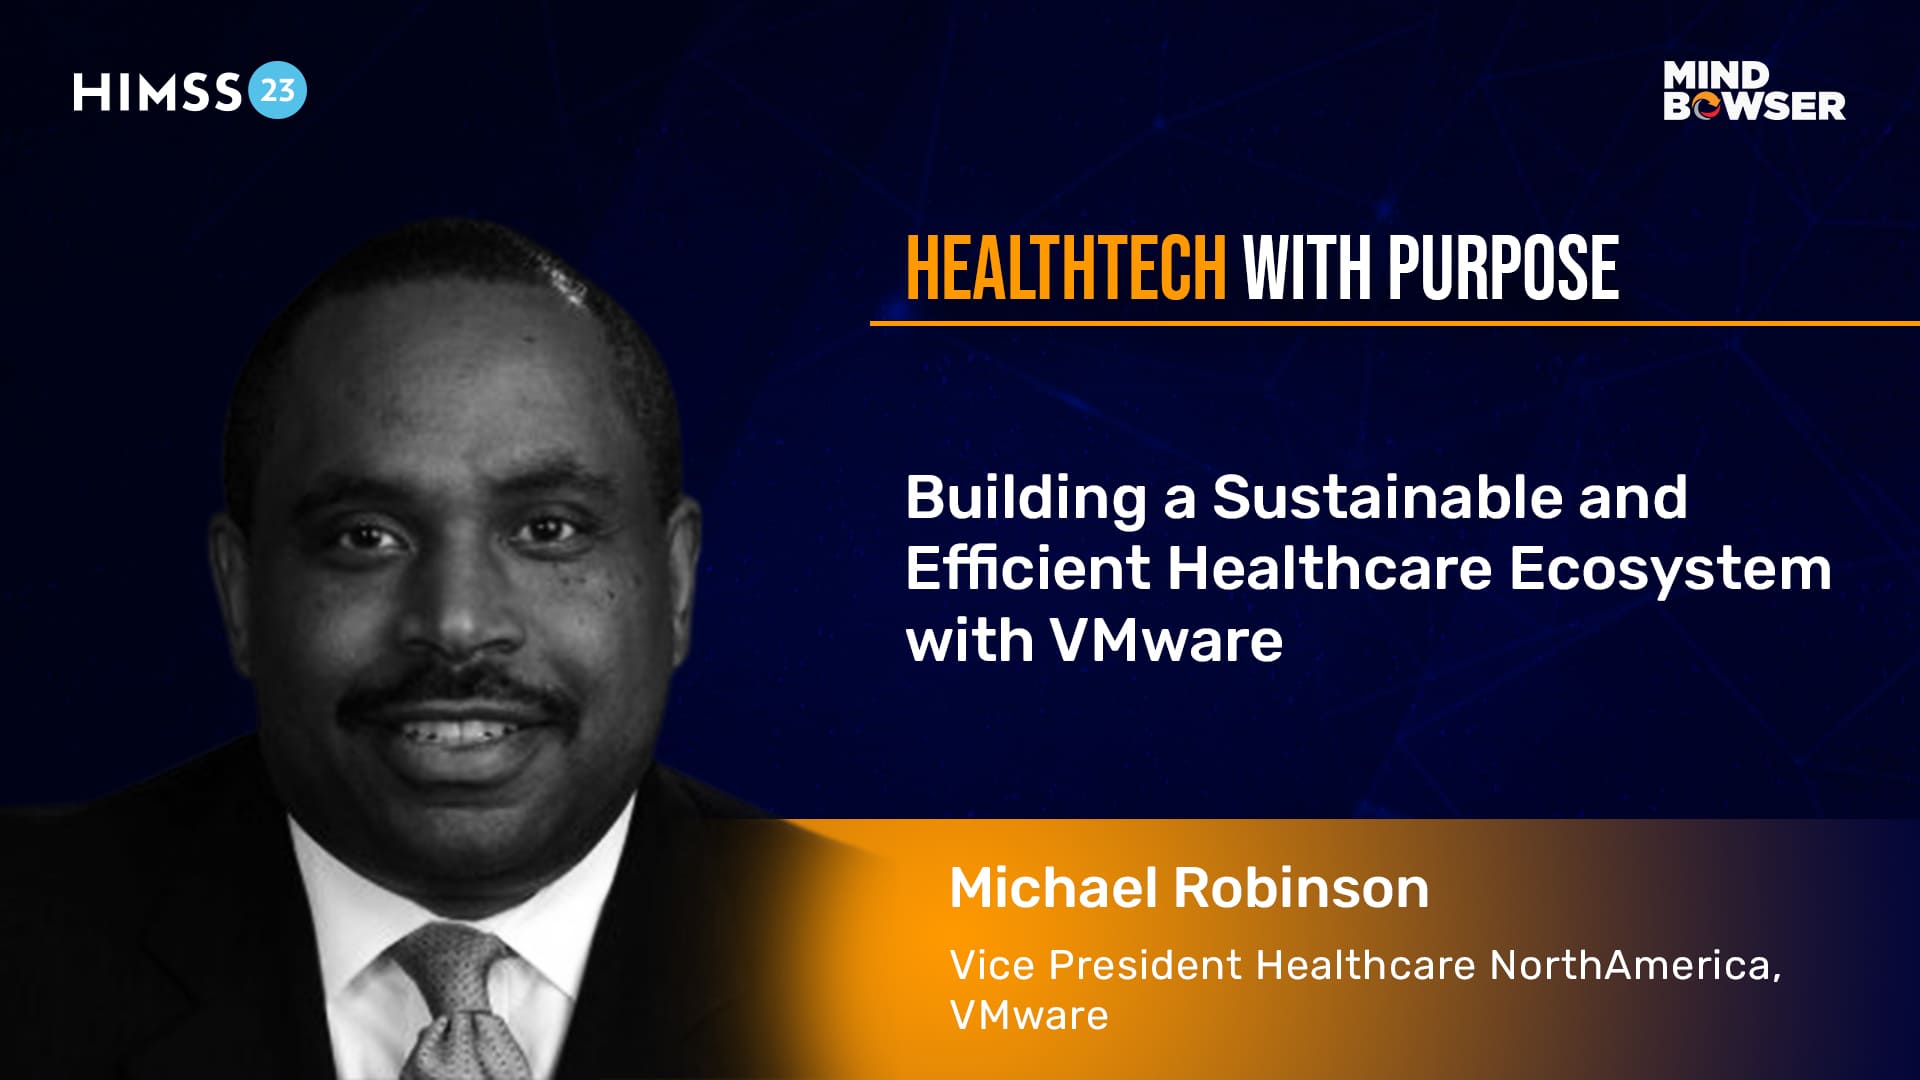 Building a Sustainable and Efficient Healthcare Ecosystem - Podcast by Michael Robinson